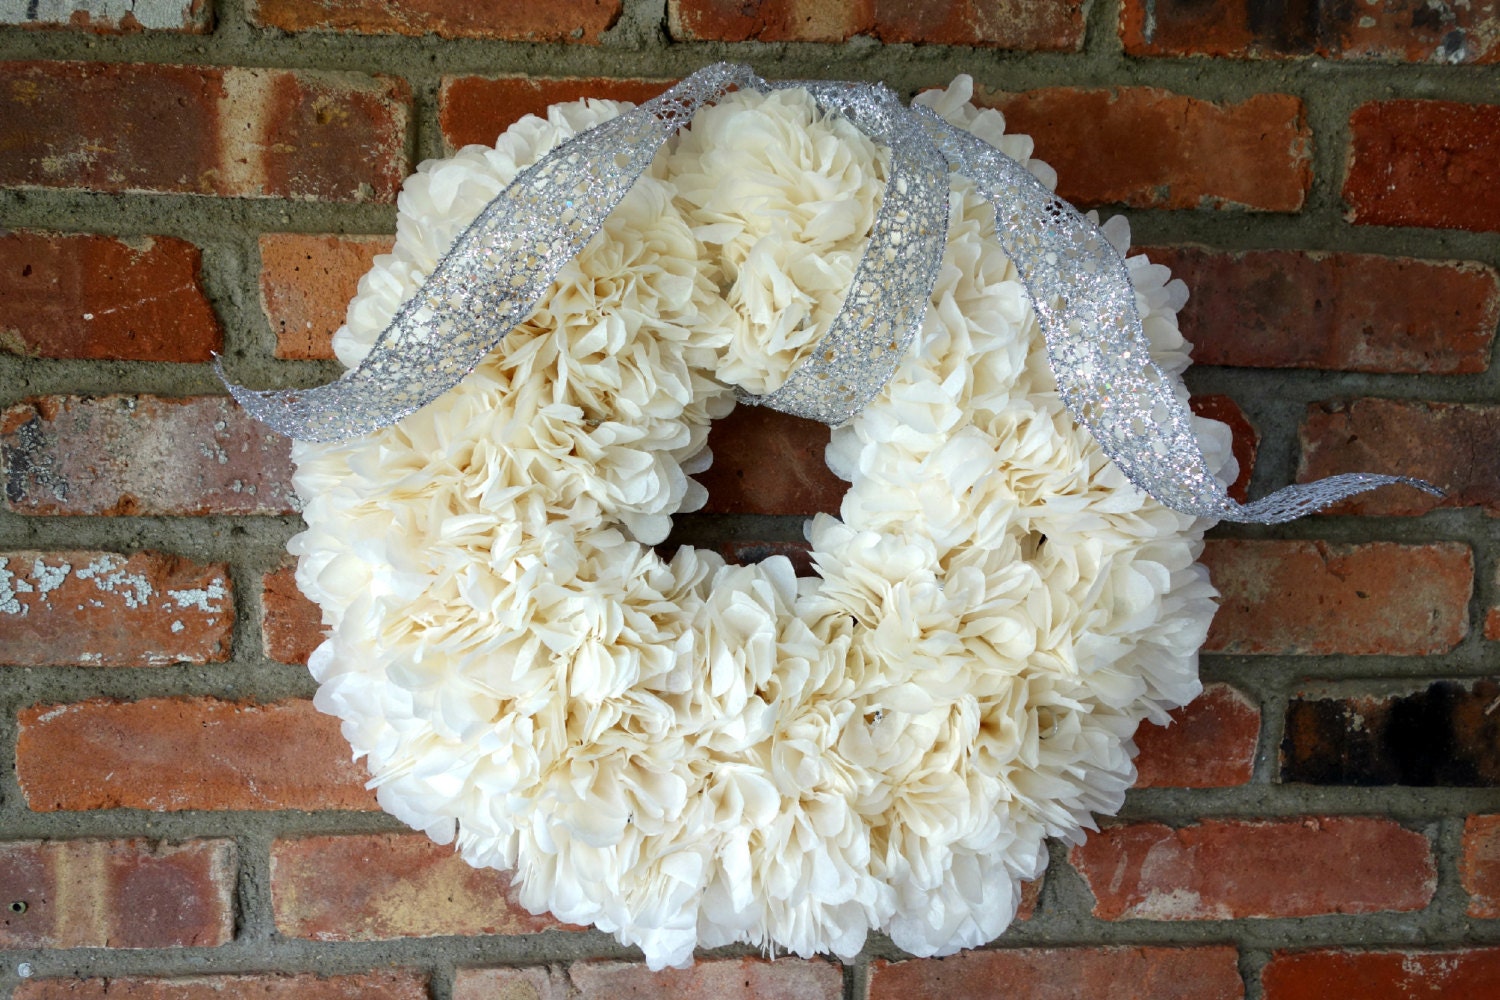 PuffScape WREATH Holiday Silver & Ivory Entrance Decor Tree Alternative Tissue Paper Flower Christmas December Wedding Place Card Holder